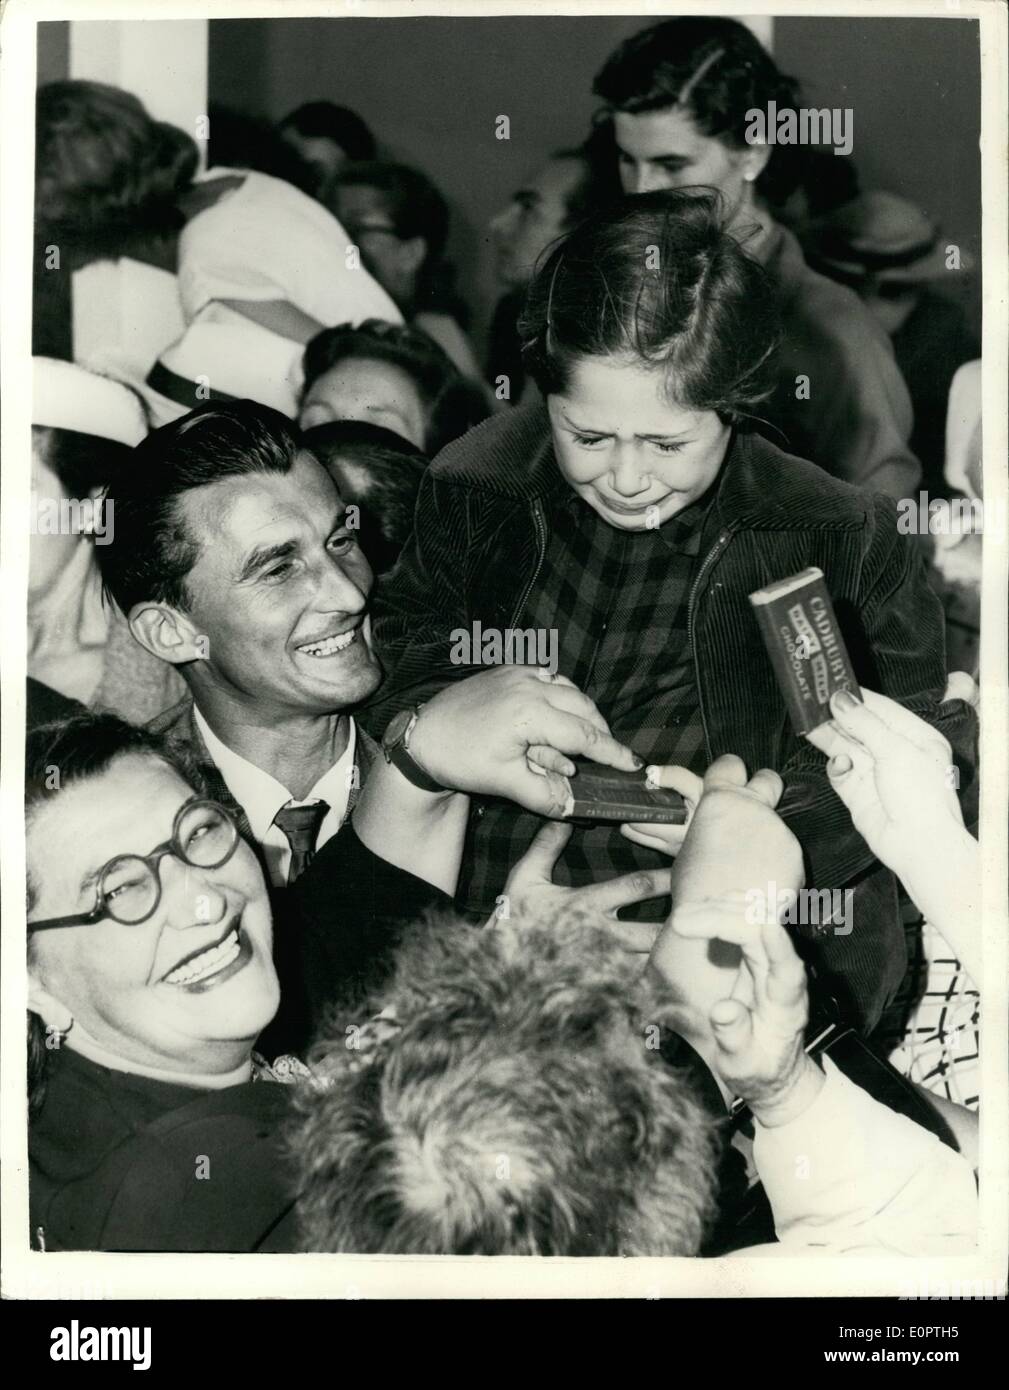 Dec. 12, 1956 - It is great to be free but she cannot help the tears.: Tears of emotion pour down the face of a little Hungarian girl when she was greeted by lots of kindness on arrival with her Hungarian refugees at Mascot airport, Sydney - Australia at the end of the their flight to Freedom. Stock Photo